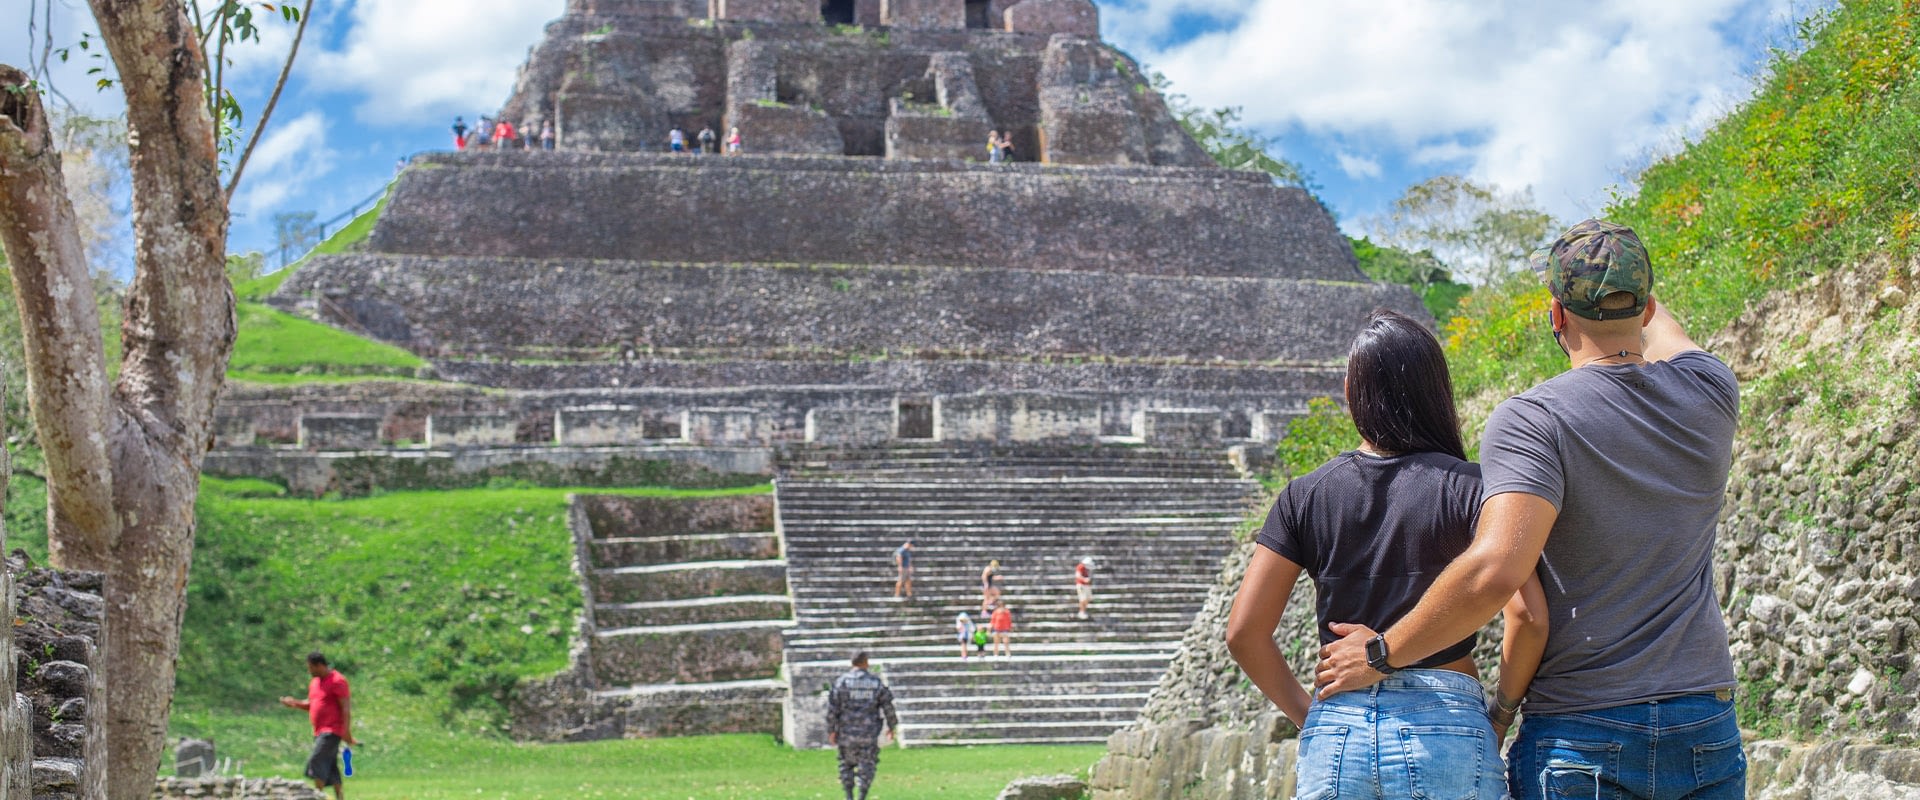 Explore the Ancient Mayan Ruins in Belize with our Tours